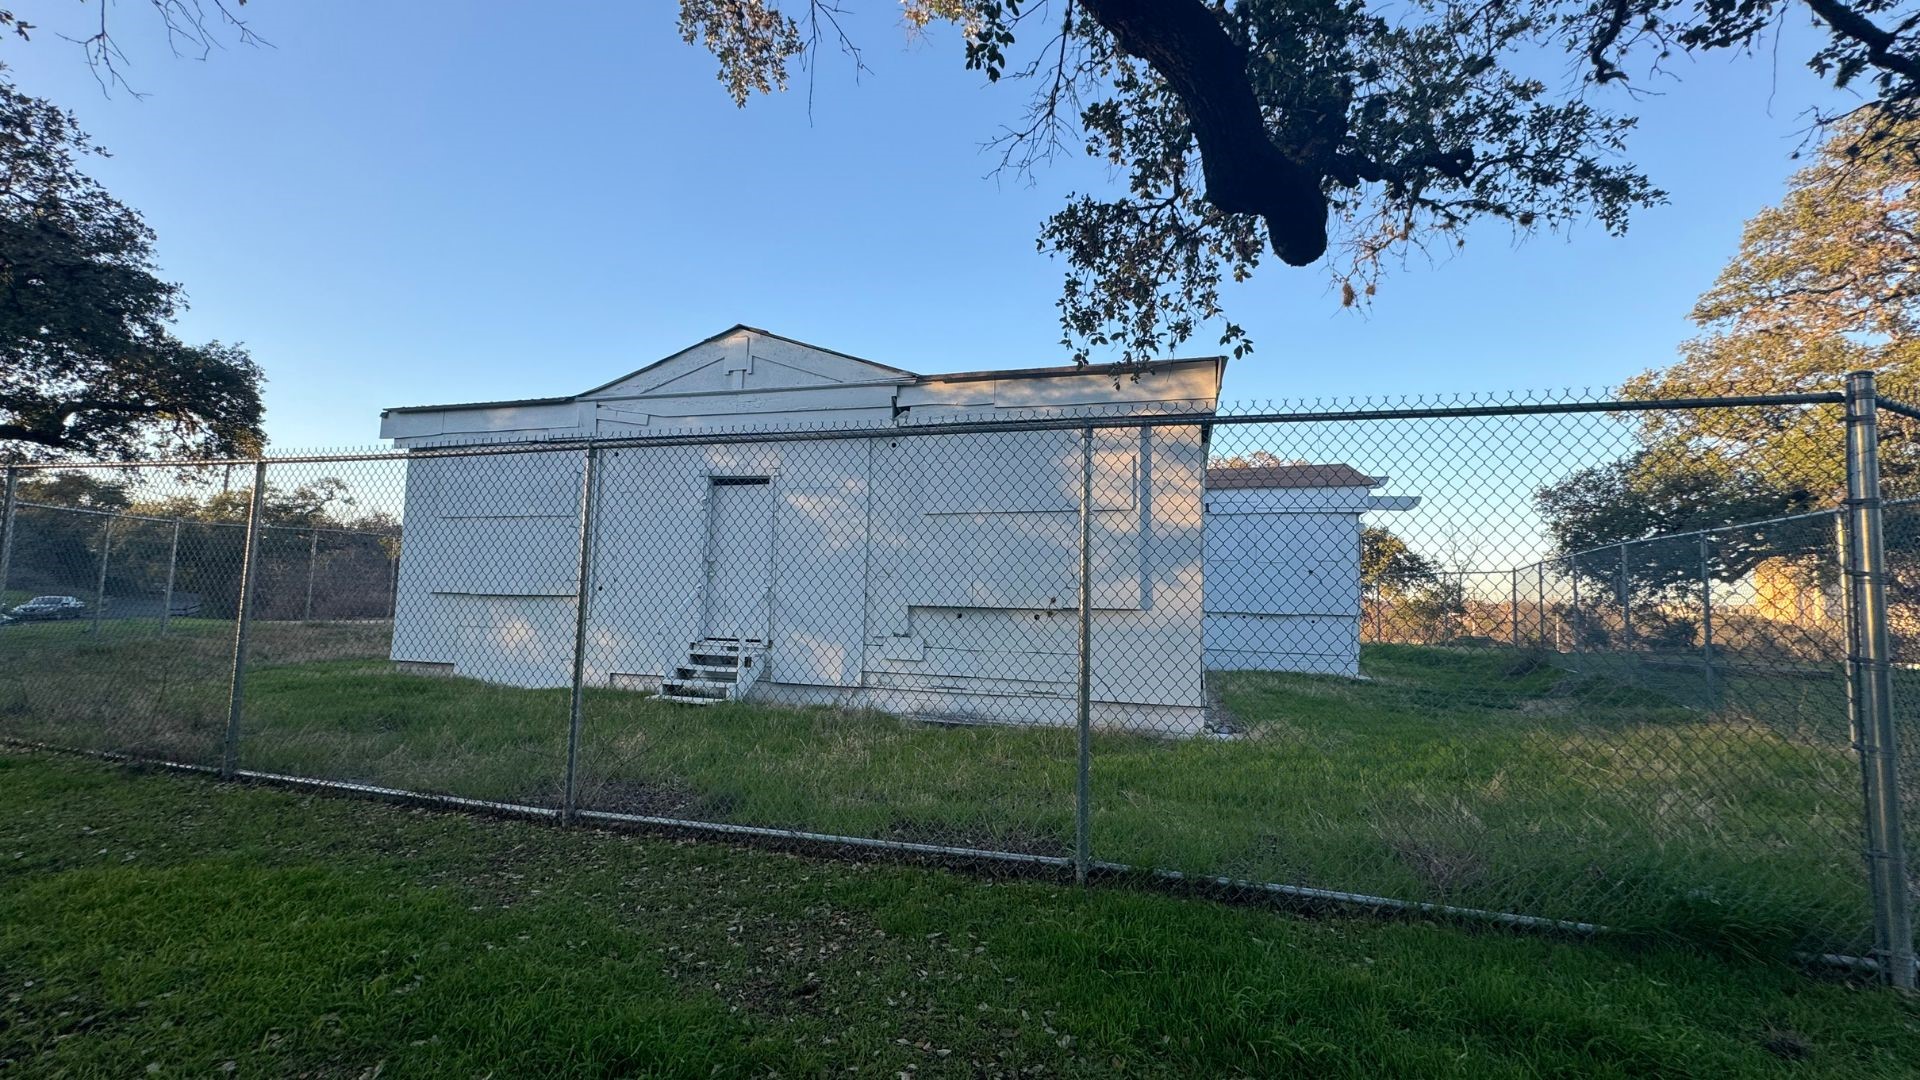 City of Austin staff are looking for new ways to fund restoration plans for the Norwood House. Neighbors hope to see the house preserved in the growing community.